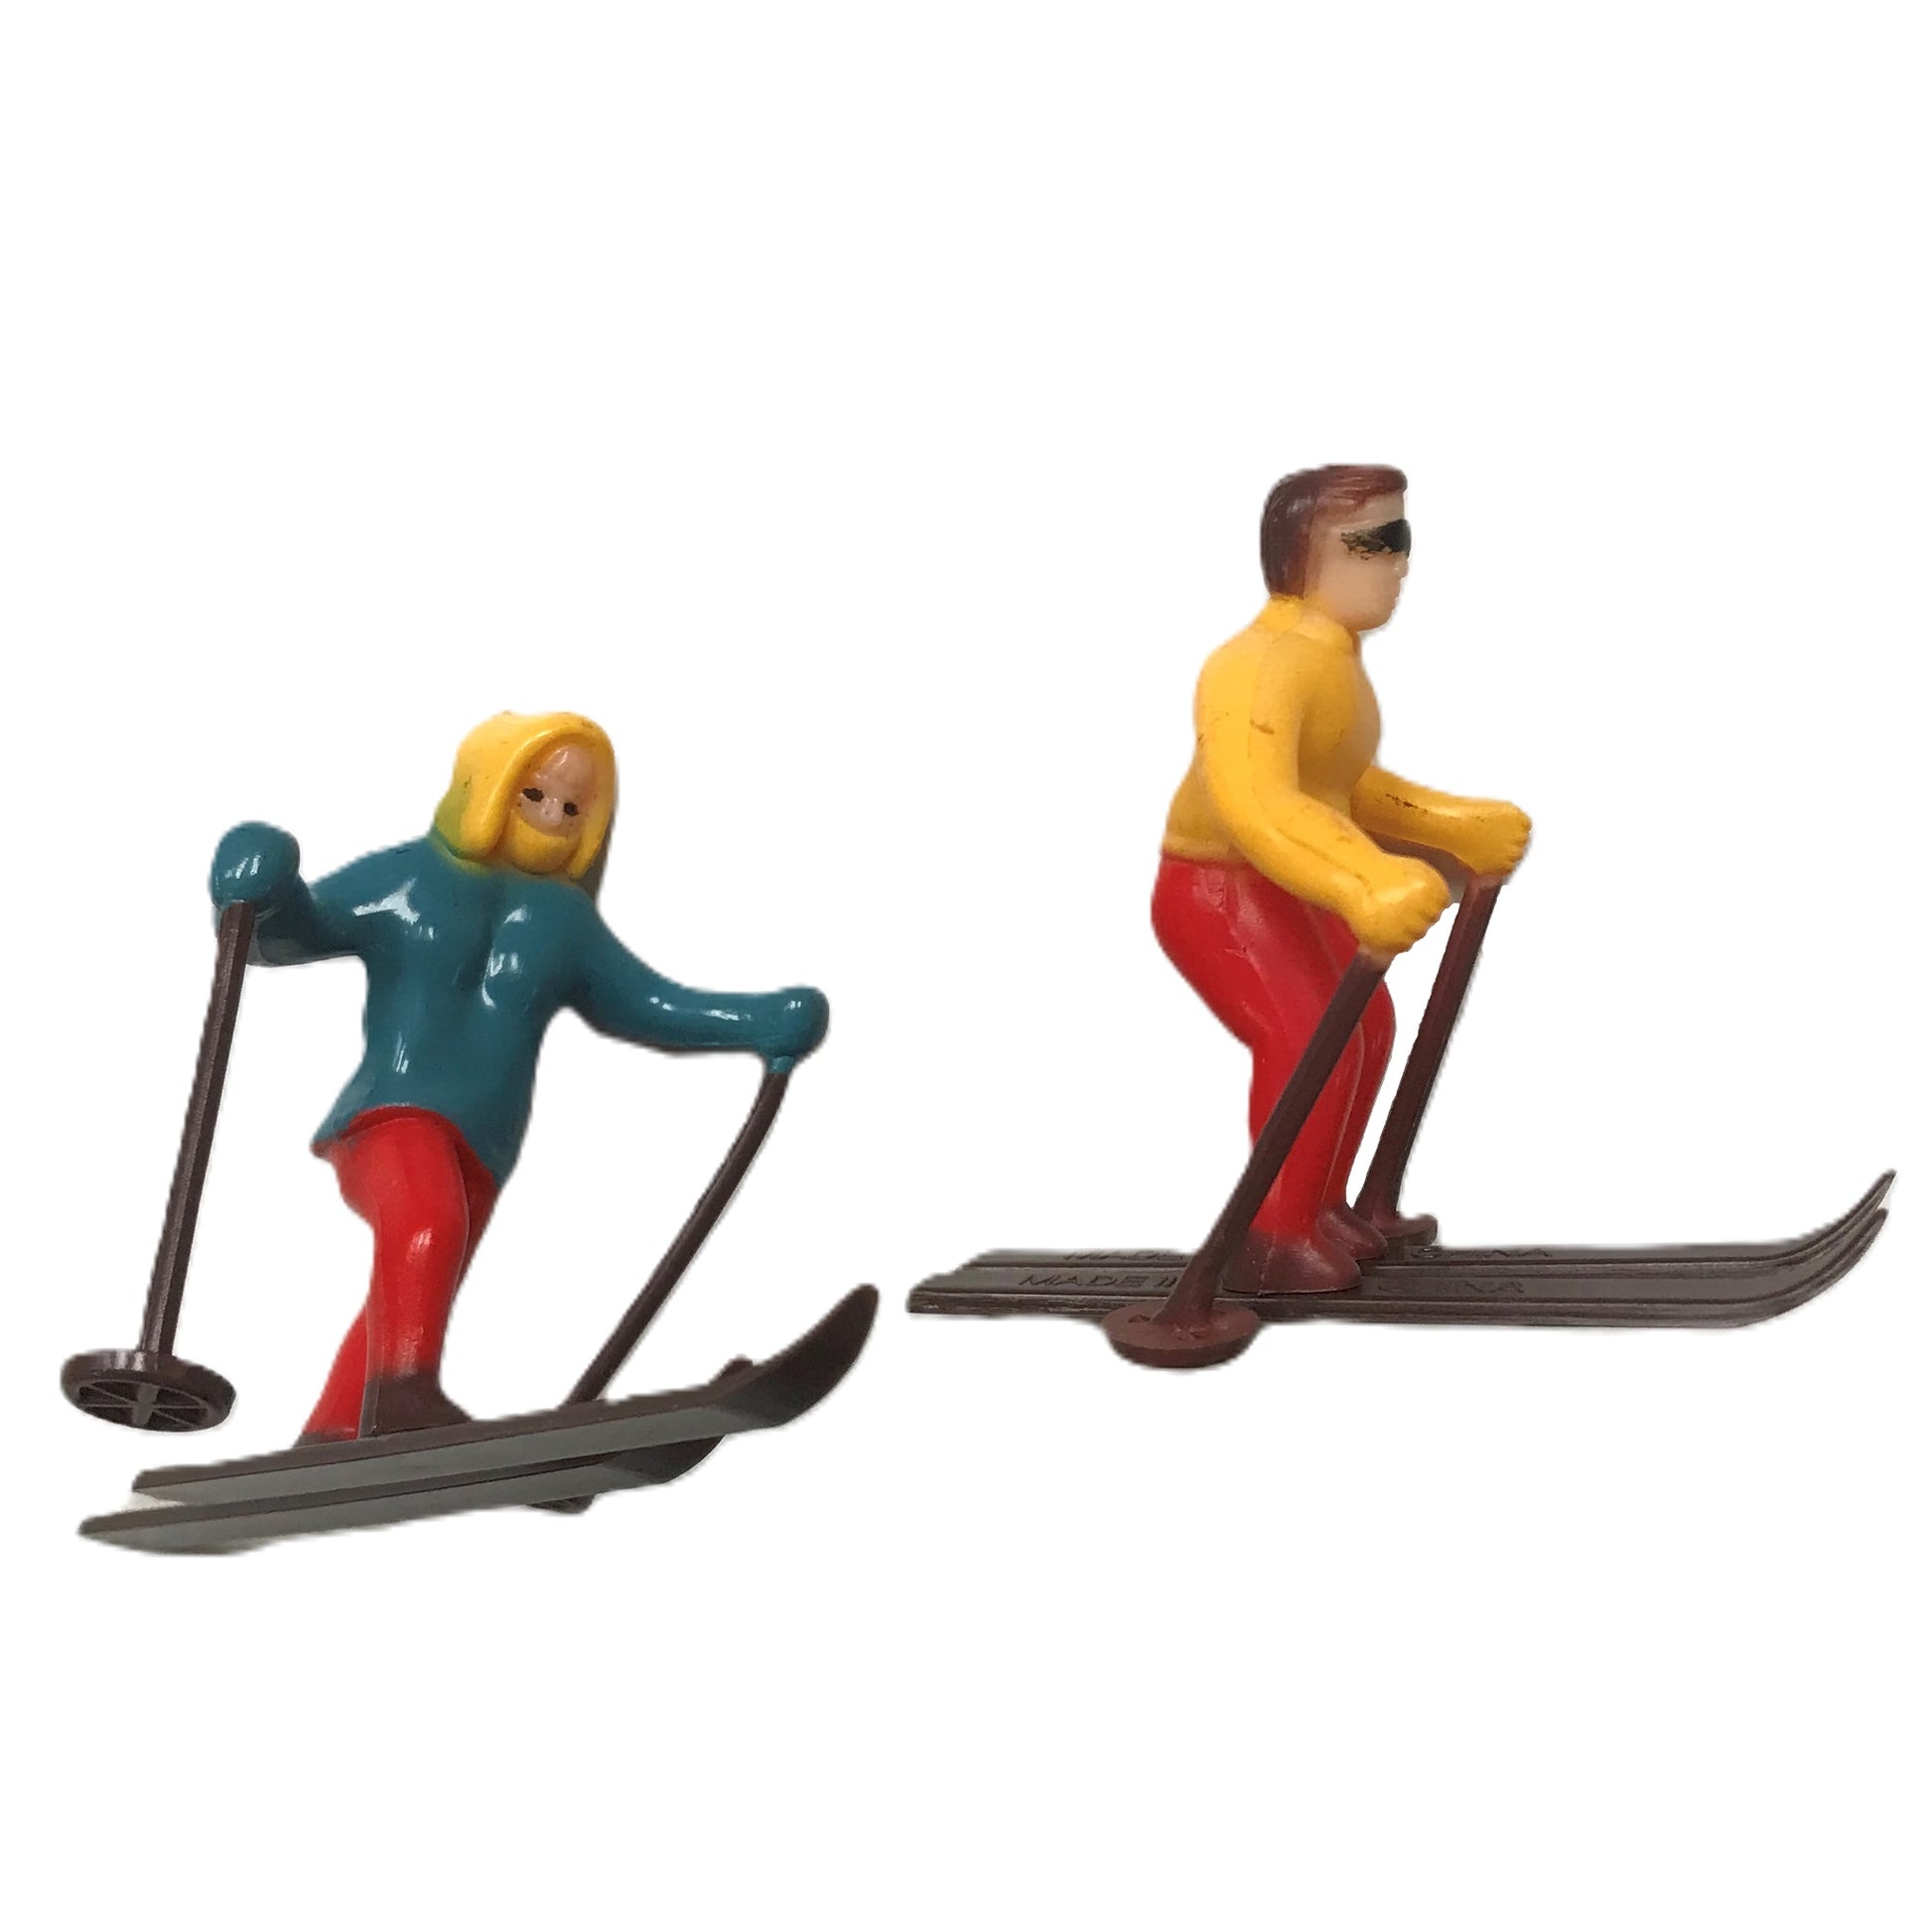 Dynamic cross-country skiing cake topper set, featuring figures in colorful skiing attire, poised in active skiing stances, suitable for winter sports themed cakes.